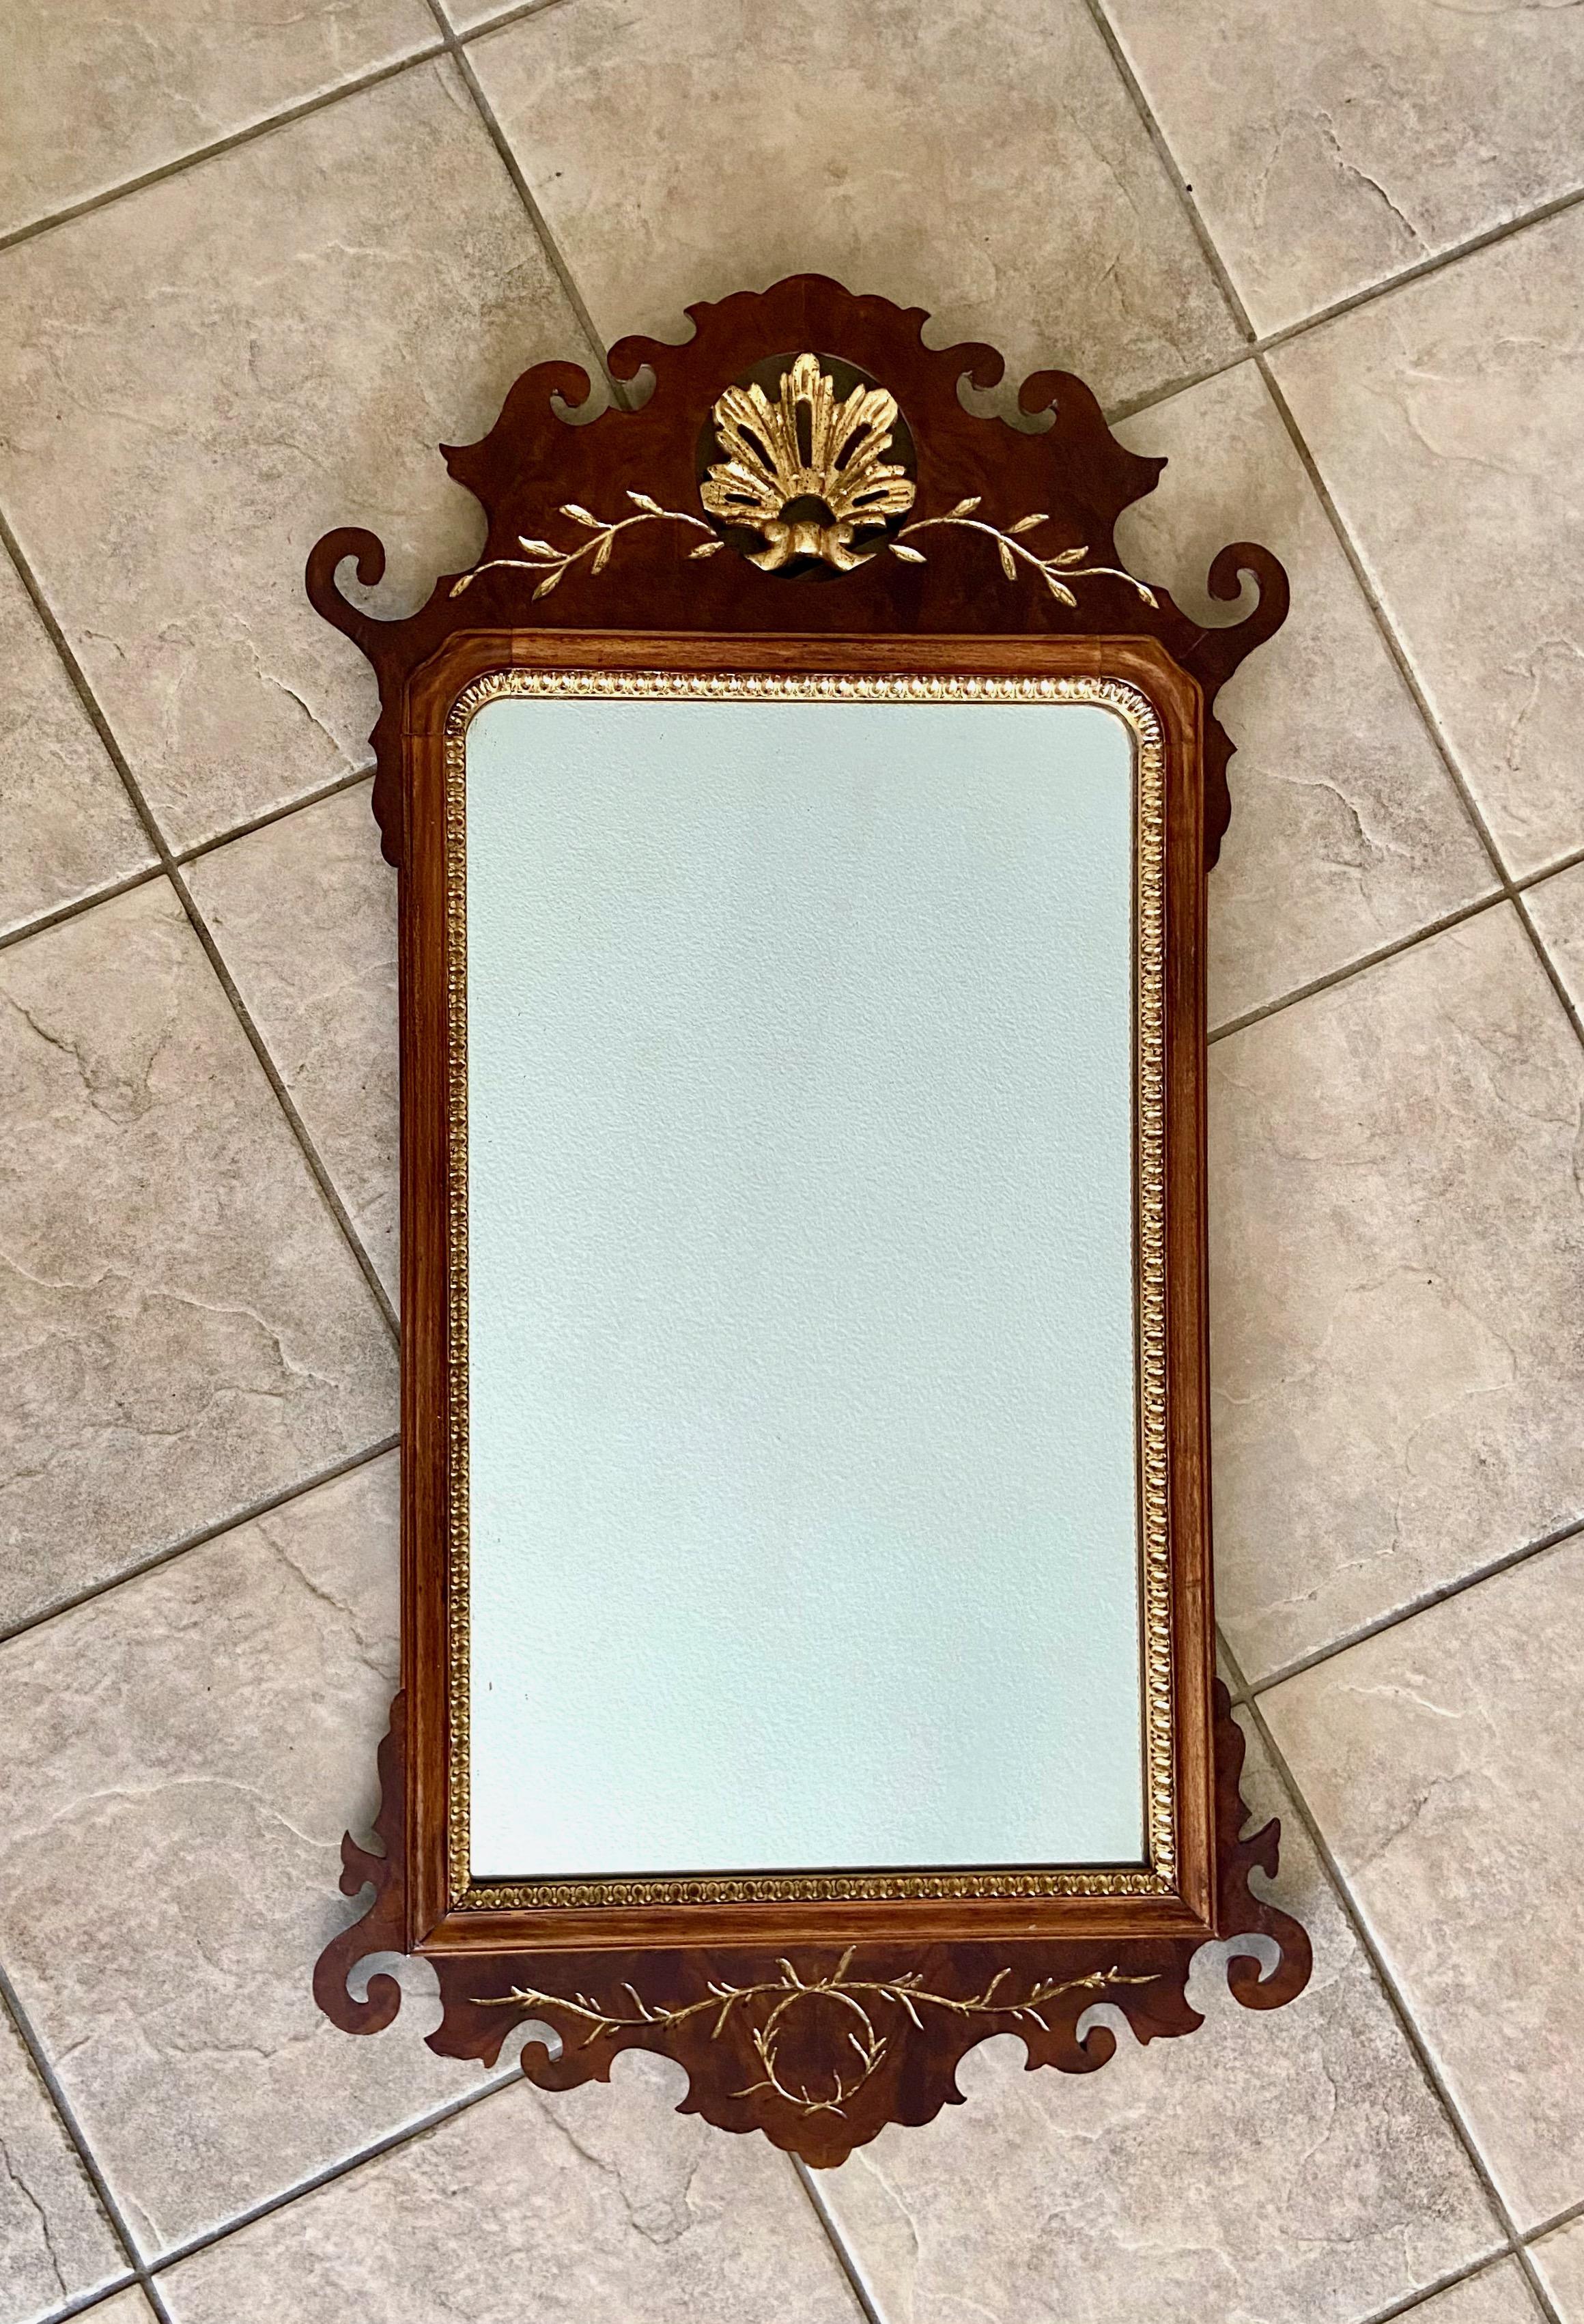 Chippendale style carved walnut wood with gilt highlighting wall mirror. Label on back 